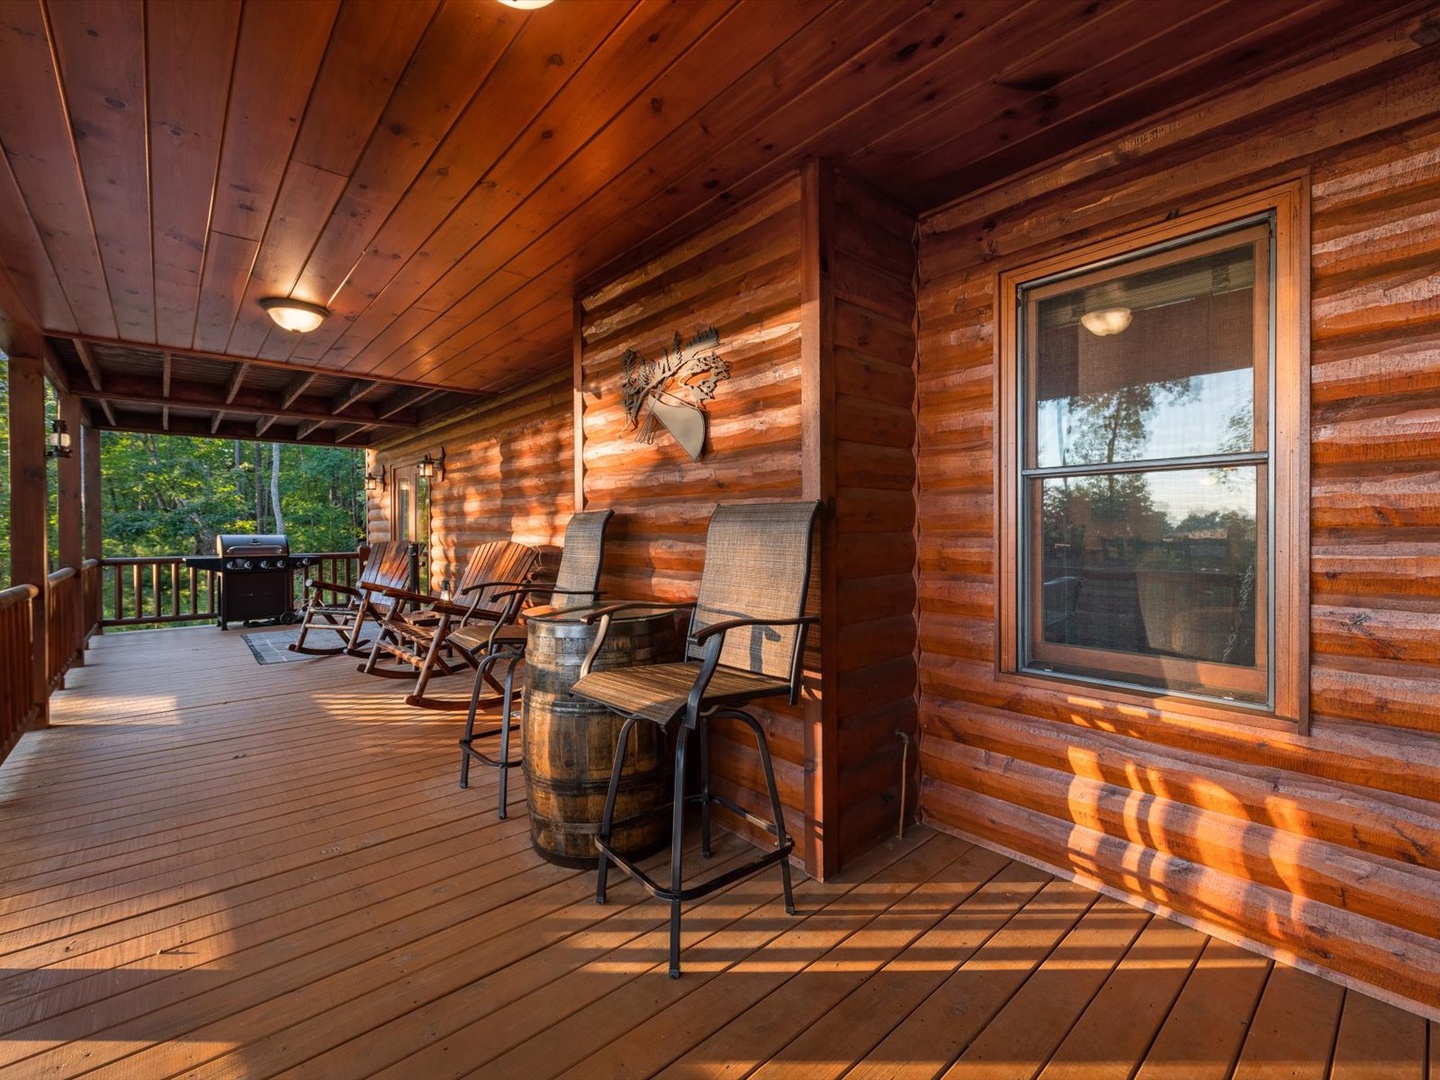 Soaring Hawk Lodge - Entry Level Deck Outdoor Fireplace Area